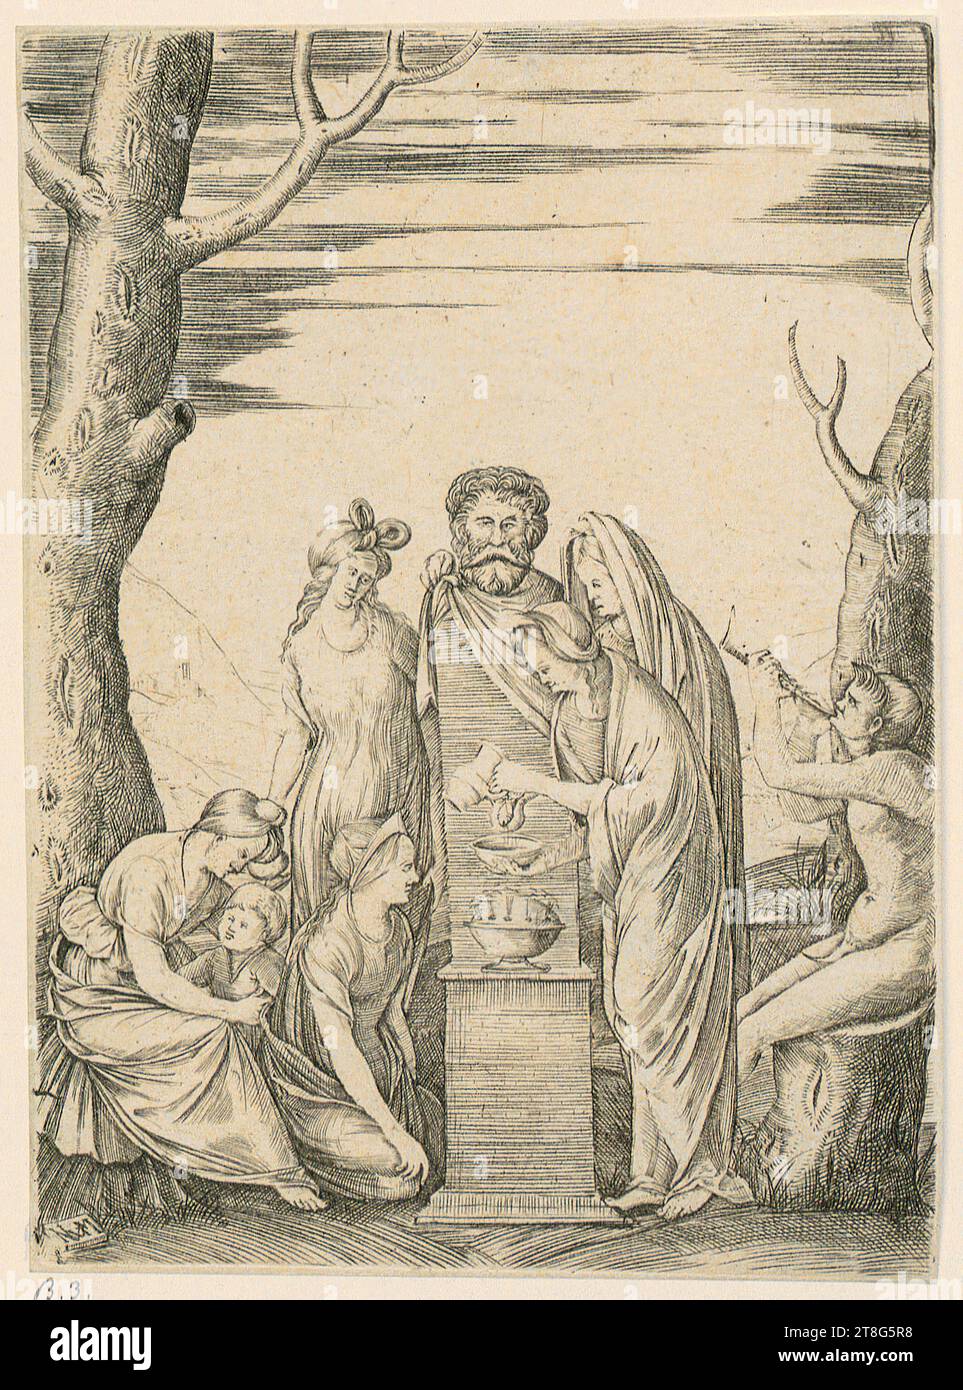 Nicolaus Wilborn (1531, 1538 mentioned around), artist Jacopo de' Barbari (1460, 1470 around - before 1516), copy after, Sacrifices to Priapus, origin of the print medium: 1531 - 1538, copperplate engraving, sheet size: 14.9 x 10.9 cm, lower left on stone tablet monogrammed 'NWM', verso lower left dealer's note with graphite '27227, DZ Stock Photo